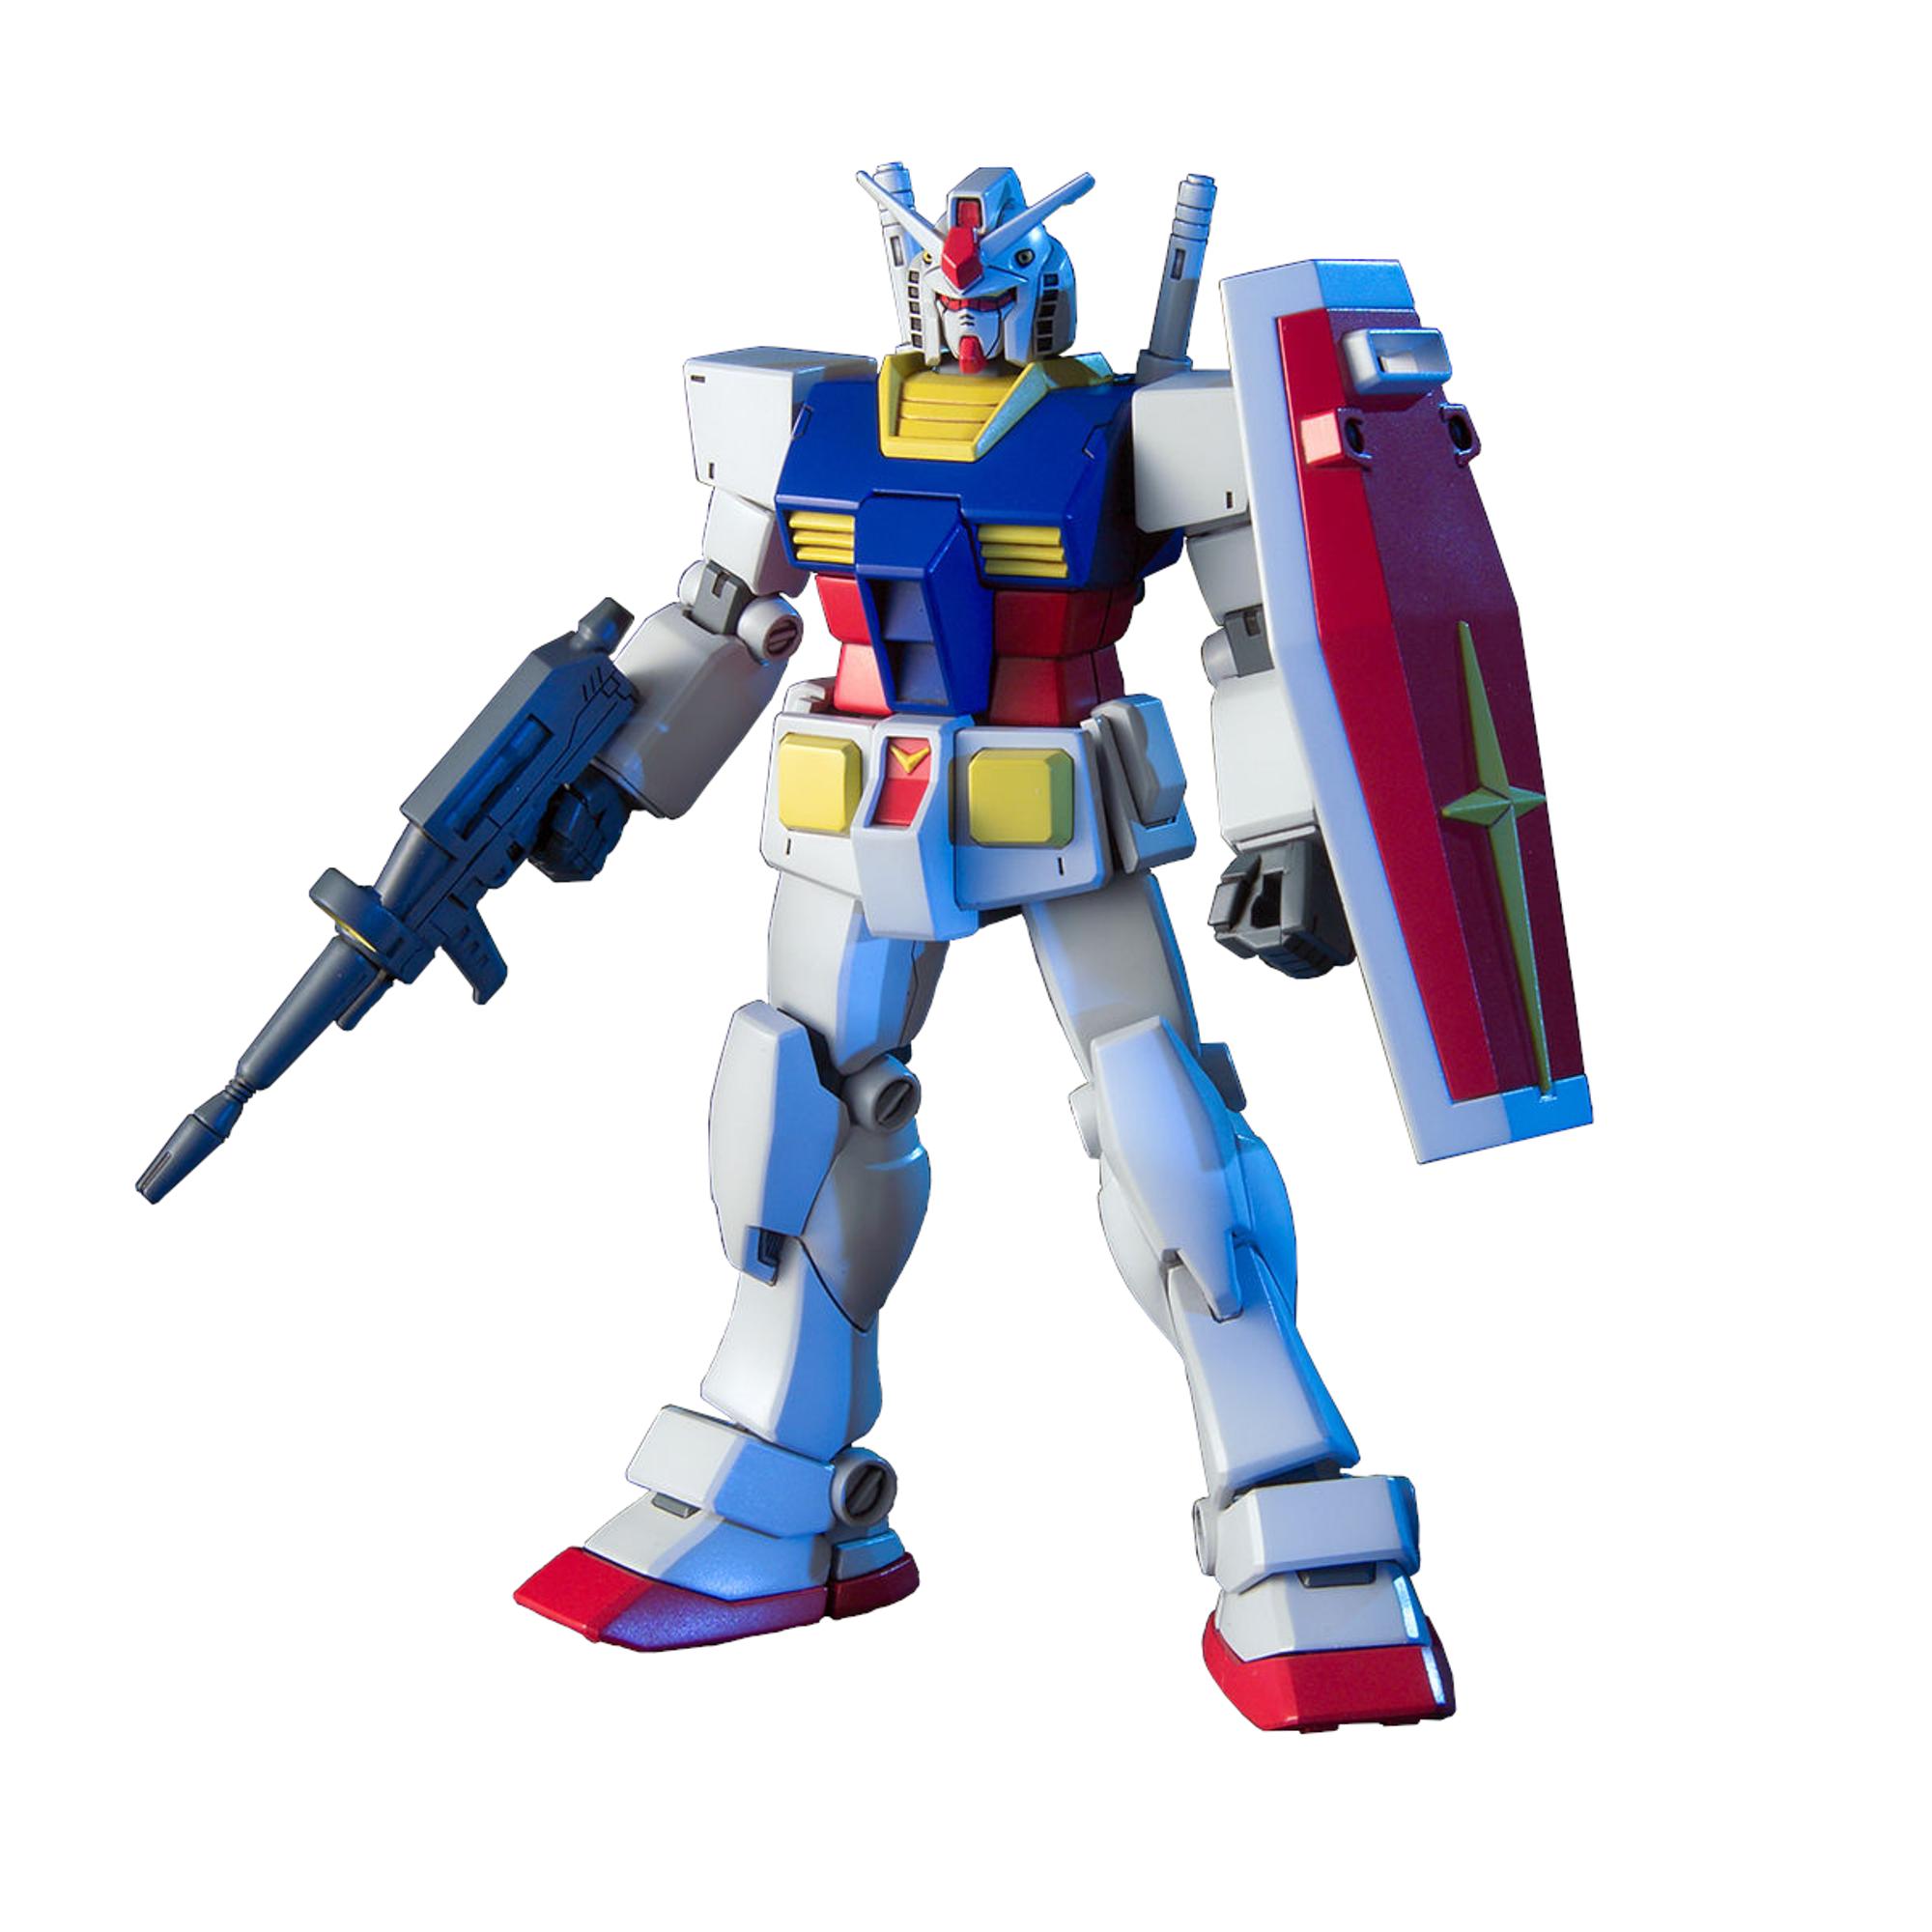 Bandai 1/144 HG Universal Century G-Armor (RX-78-2 and G-Fighter)